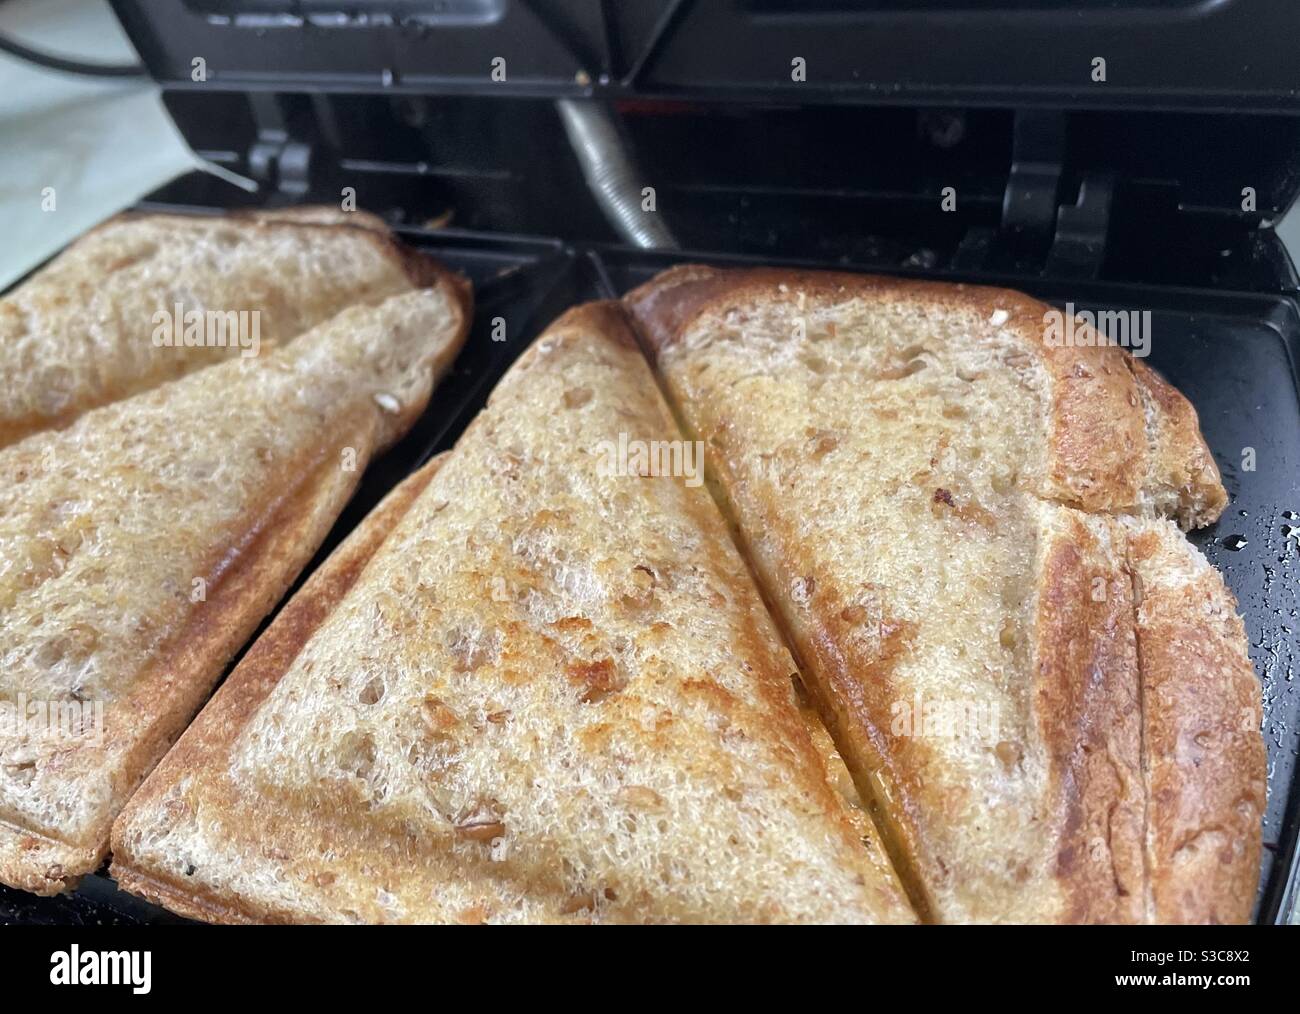 https://c8.alamy.com/comp/S3C8X2/a-classic-toasted-cheese-sandwich-being-made-in-a-toasted-sandwich-maker-S3C8X2.jpg